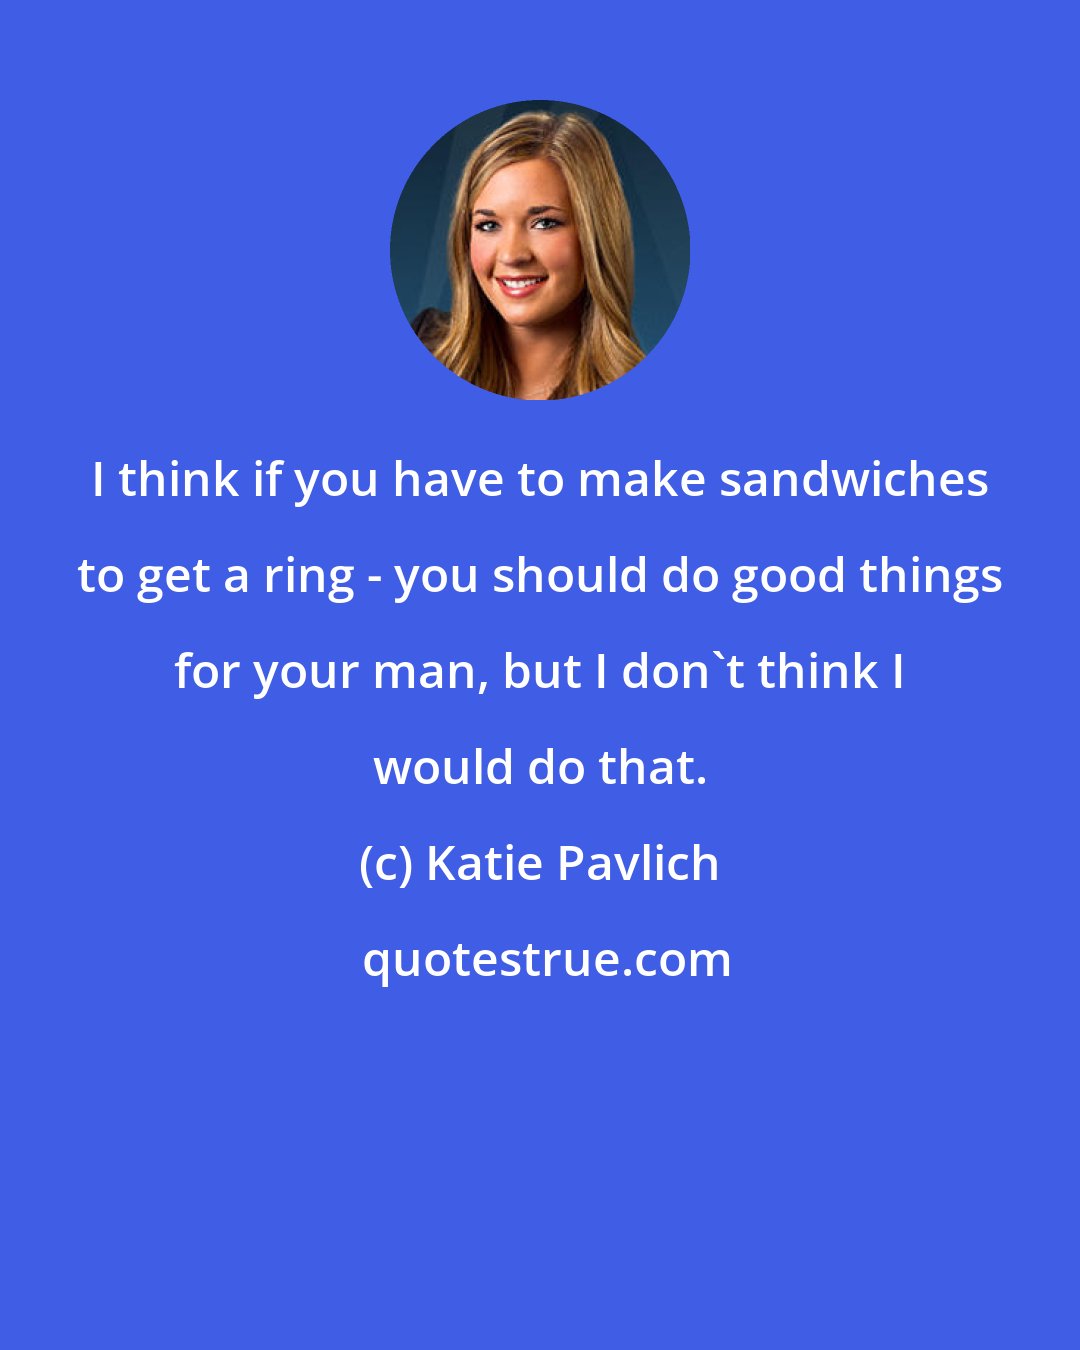 Katie Pavlich: I think if you have to make sandwiches to get a ring - you should do good things for your man, but I don't think I would do that.